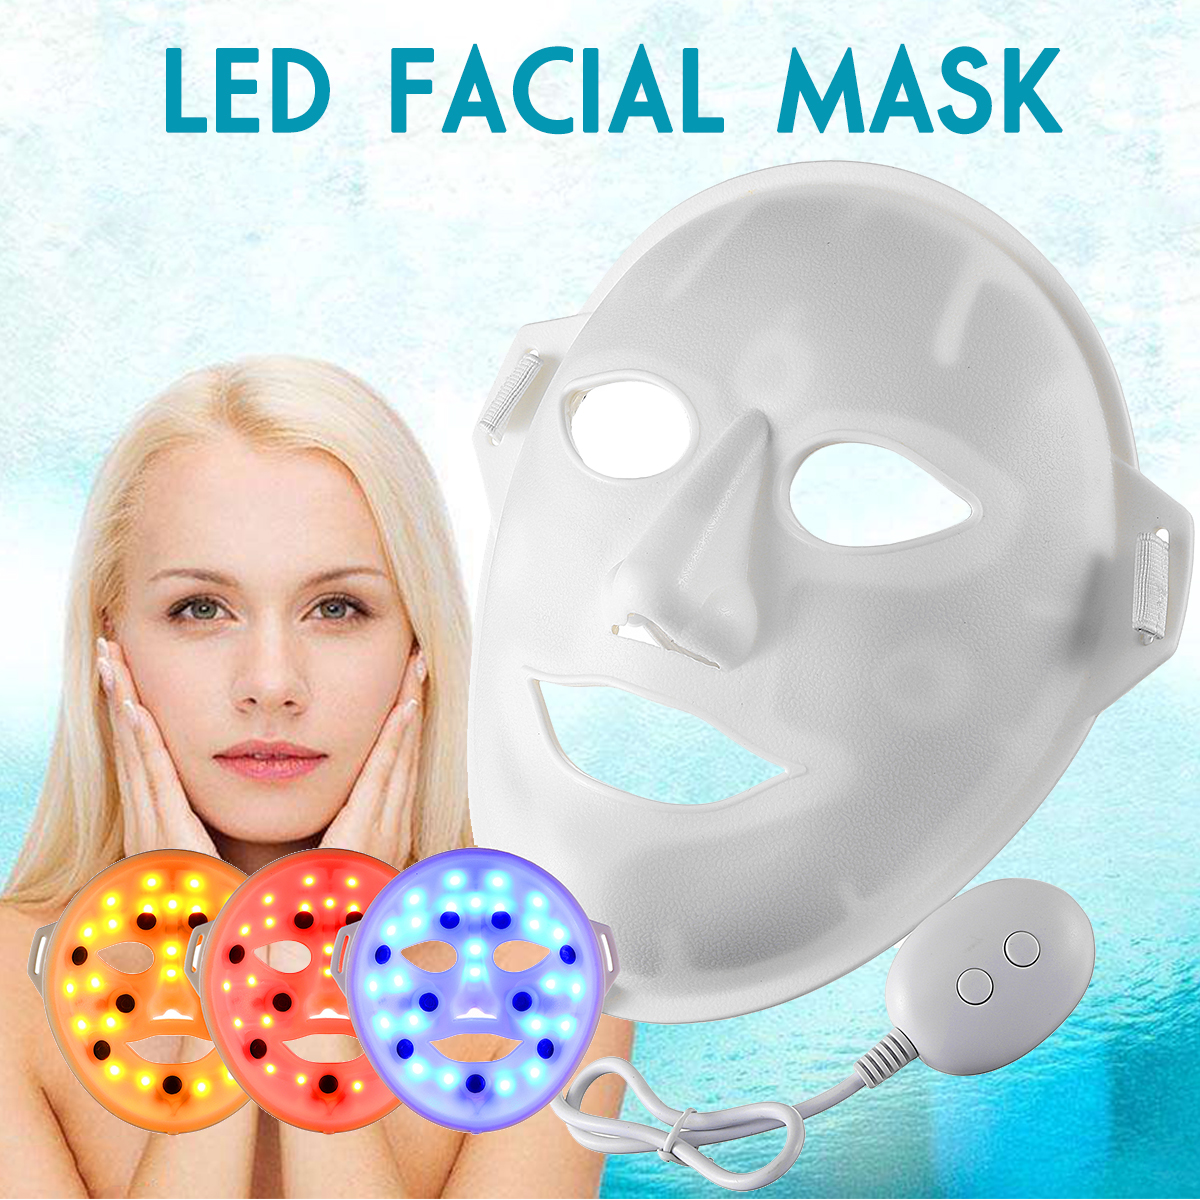 LED-Photon-Therapy-Facial-Mask-3-Colors-Vibration-Skin-Massager-Beauty-Face-Tool-1940393-1